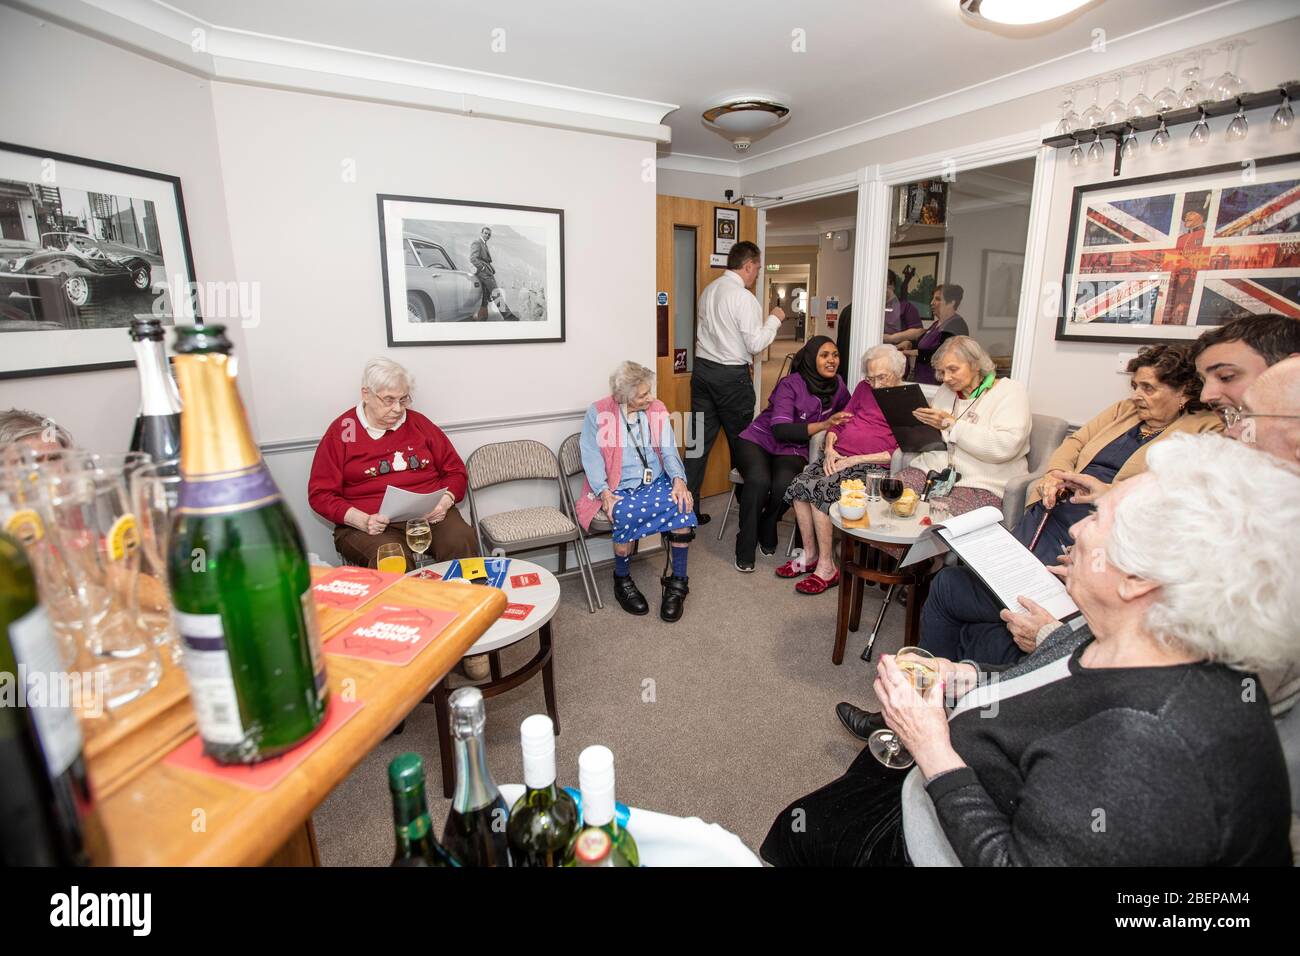 Care home which has opened a pub for residents, one of several care homes who now provide a bar area for the elderly residents, England, UK Stock Photo